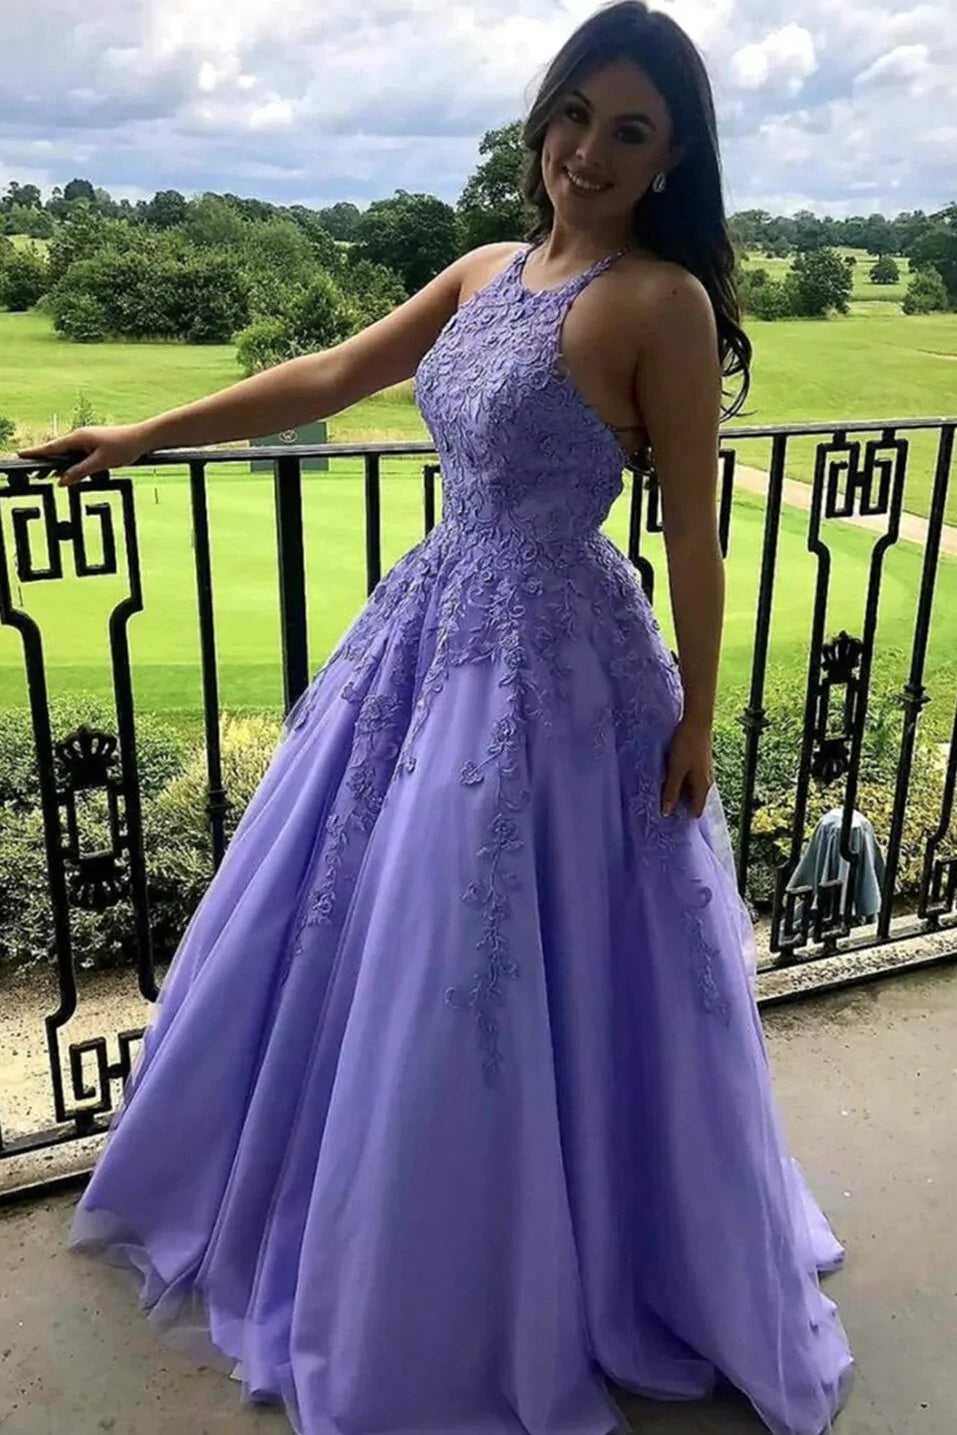 Sheer-Waist Long A-Line Prom Dress with Lace Corset